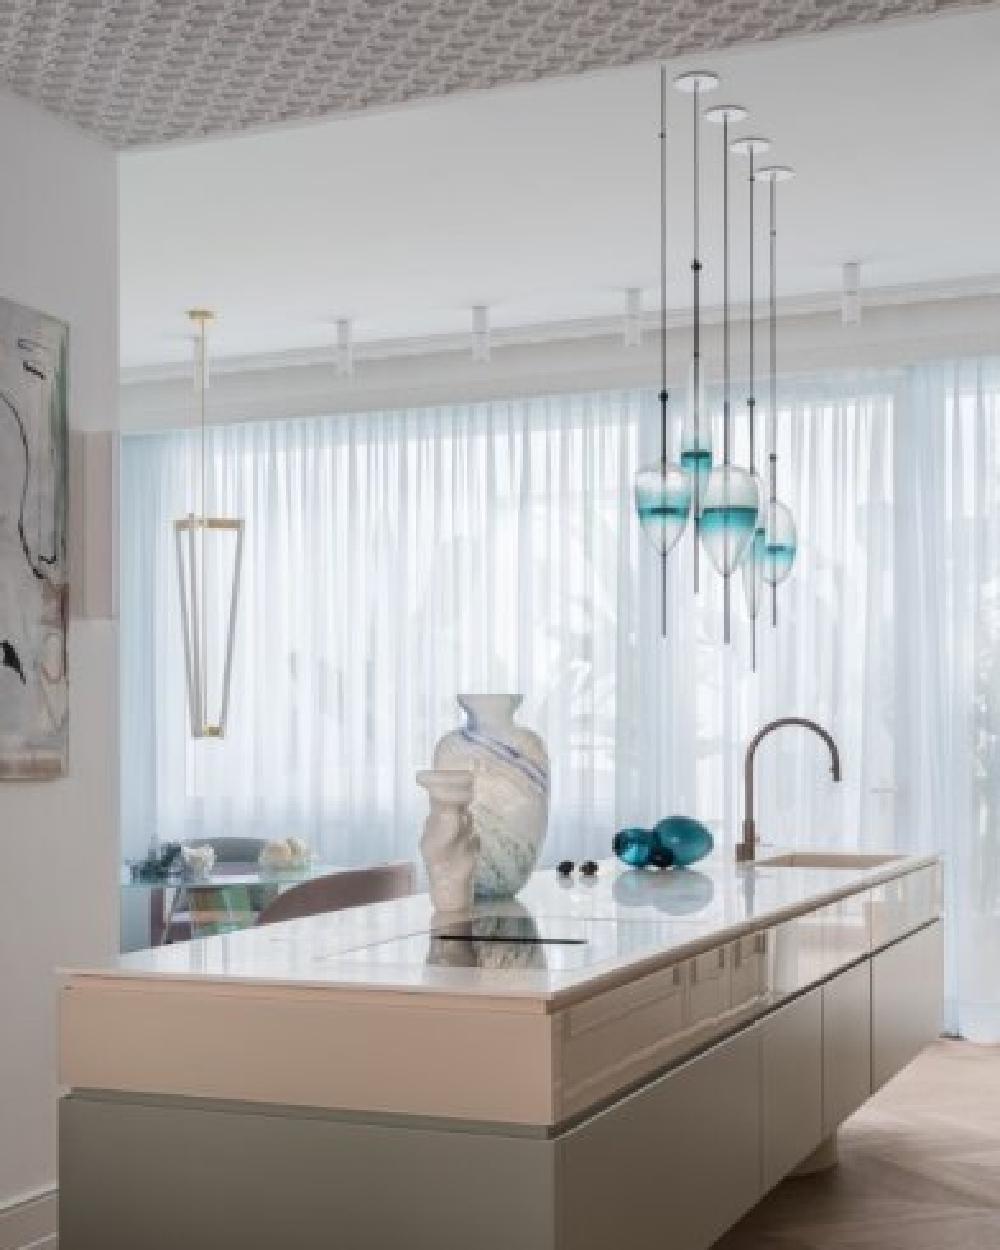 FLOW[T] S2 Pendant lamp in Turquoise by Nao Tamura for Wonderglass For Sale 1